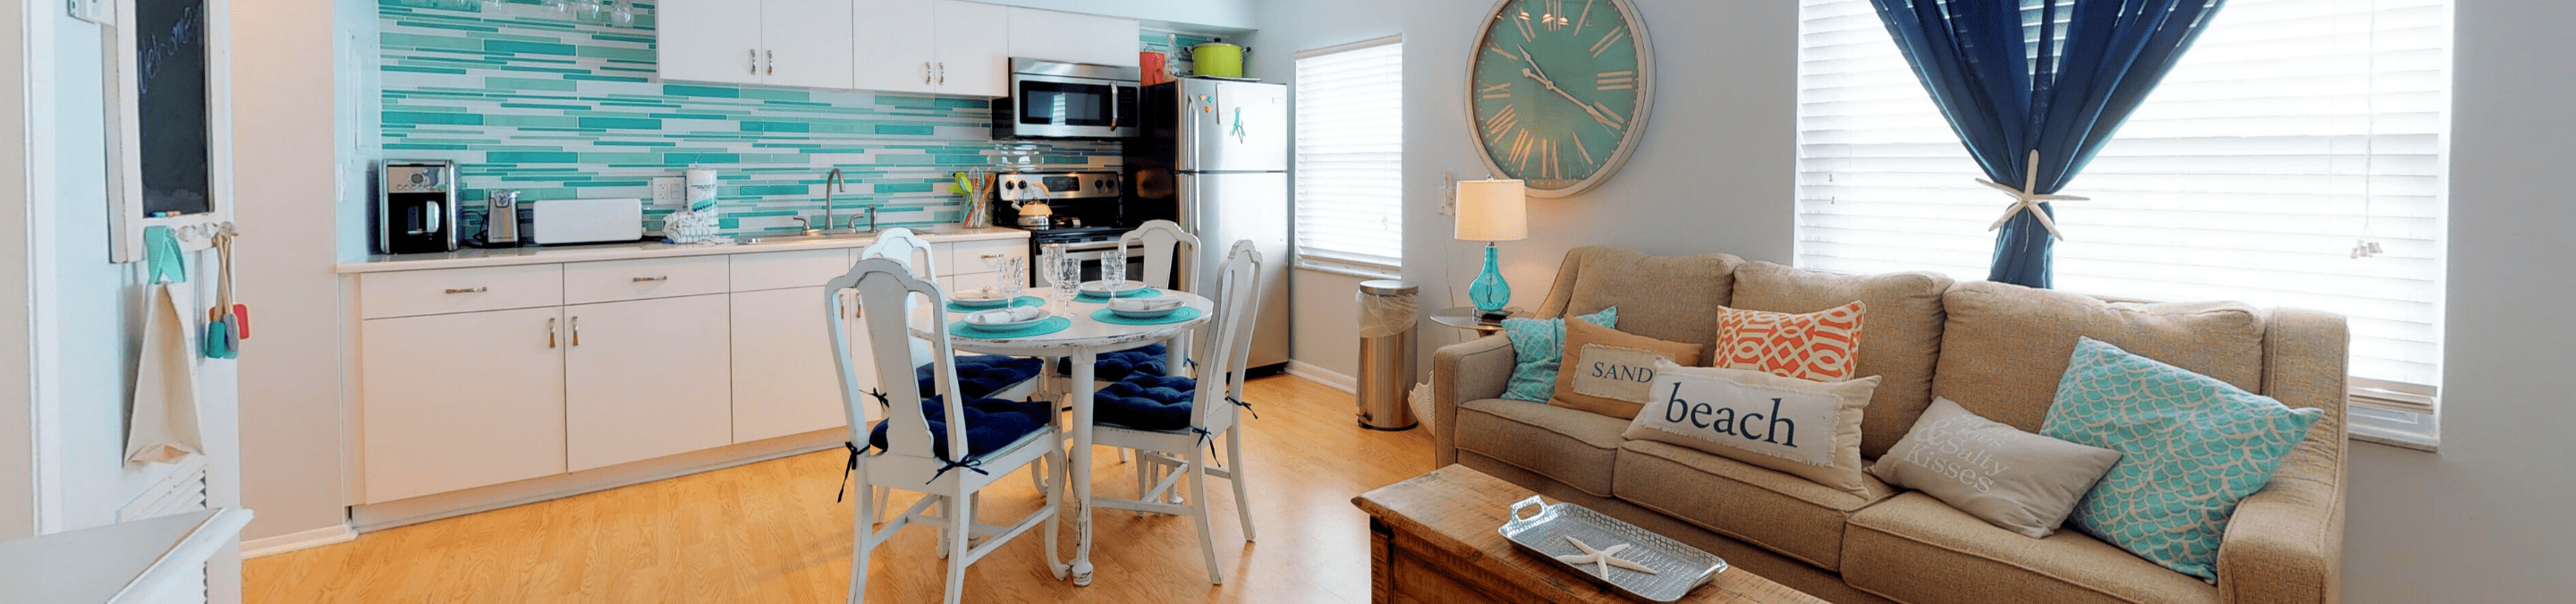 One of our beautiful 1 bedroom anna maria island condo rentals open area of living room and kitchen featuring a small round dining table for four in the middle located on Anna Maria Island